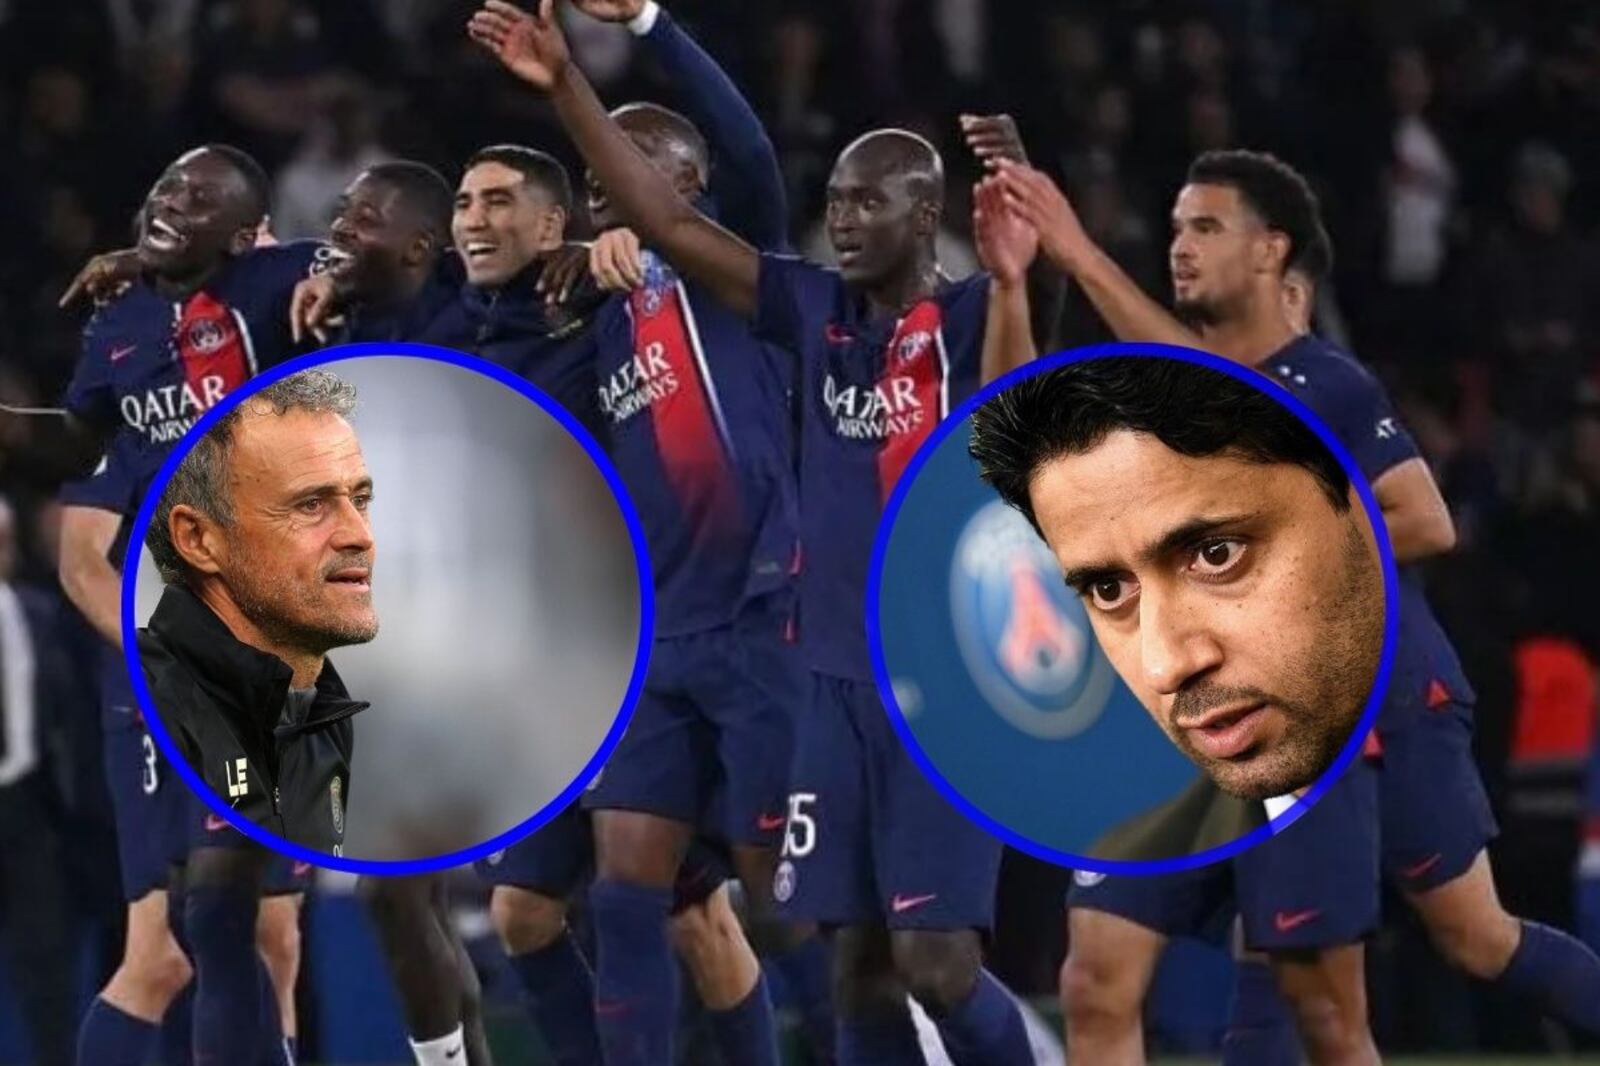 More bad news, PSG players were sanctioned for homophobic chants